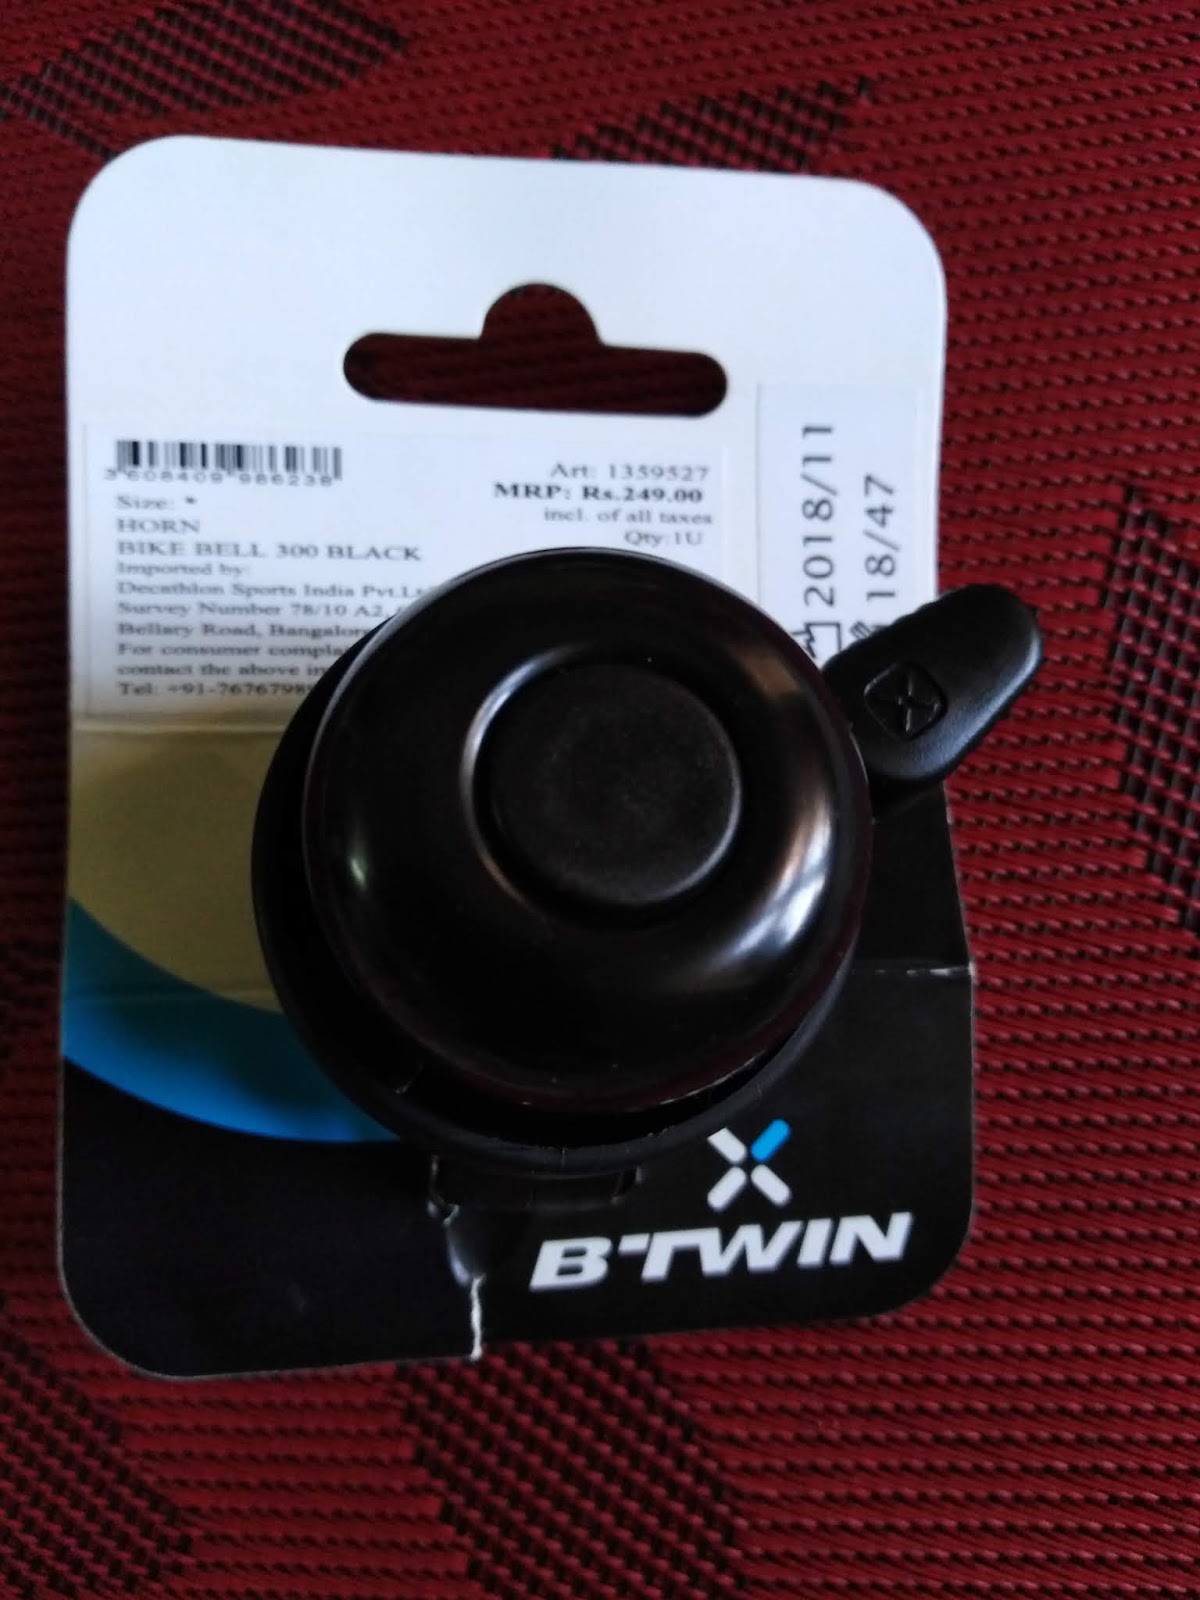 btwin cycle bell